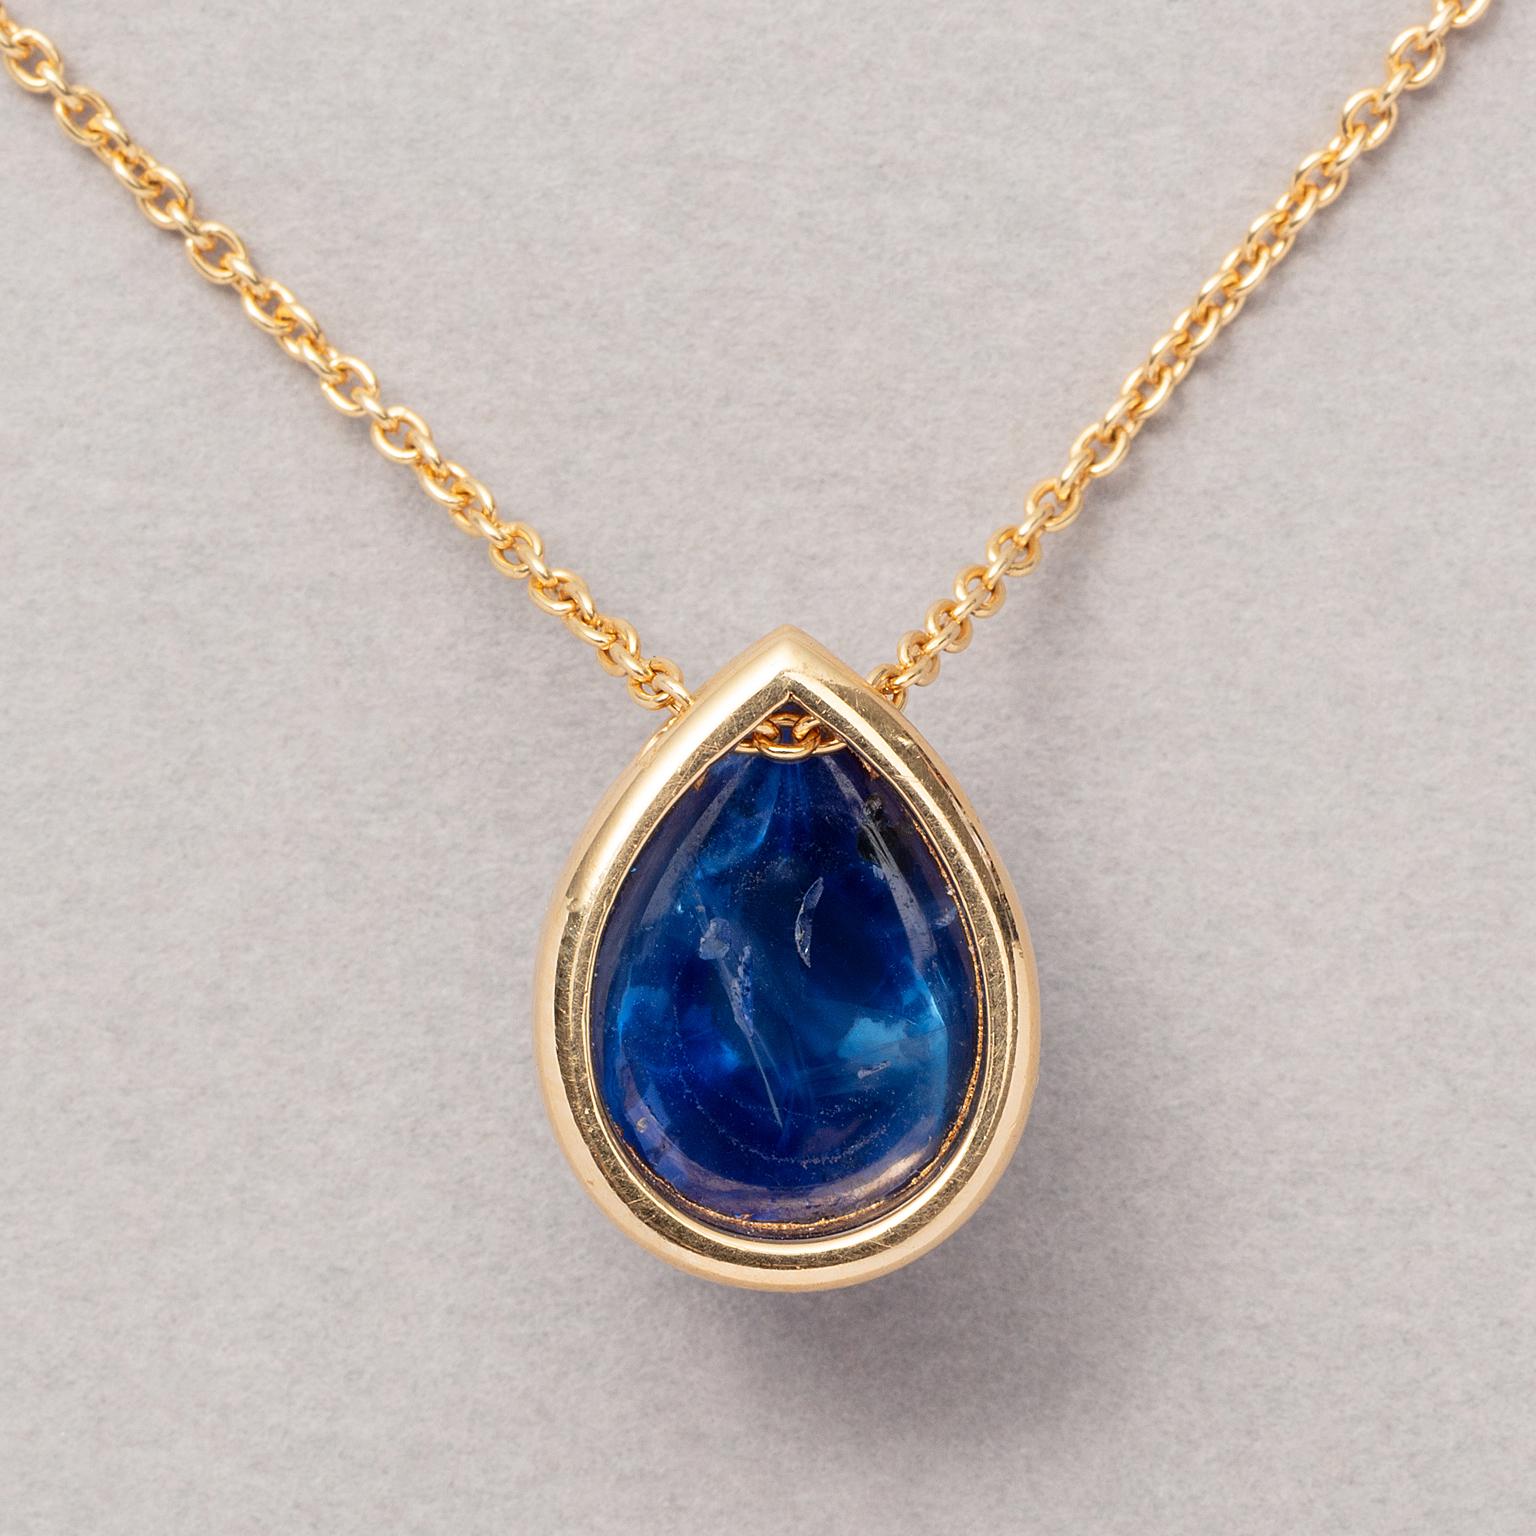 Cabochon An 18 Carat Gold and Sapphire Pendant